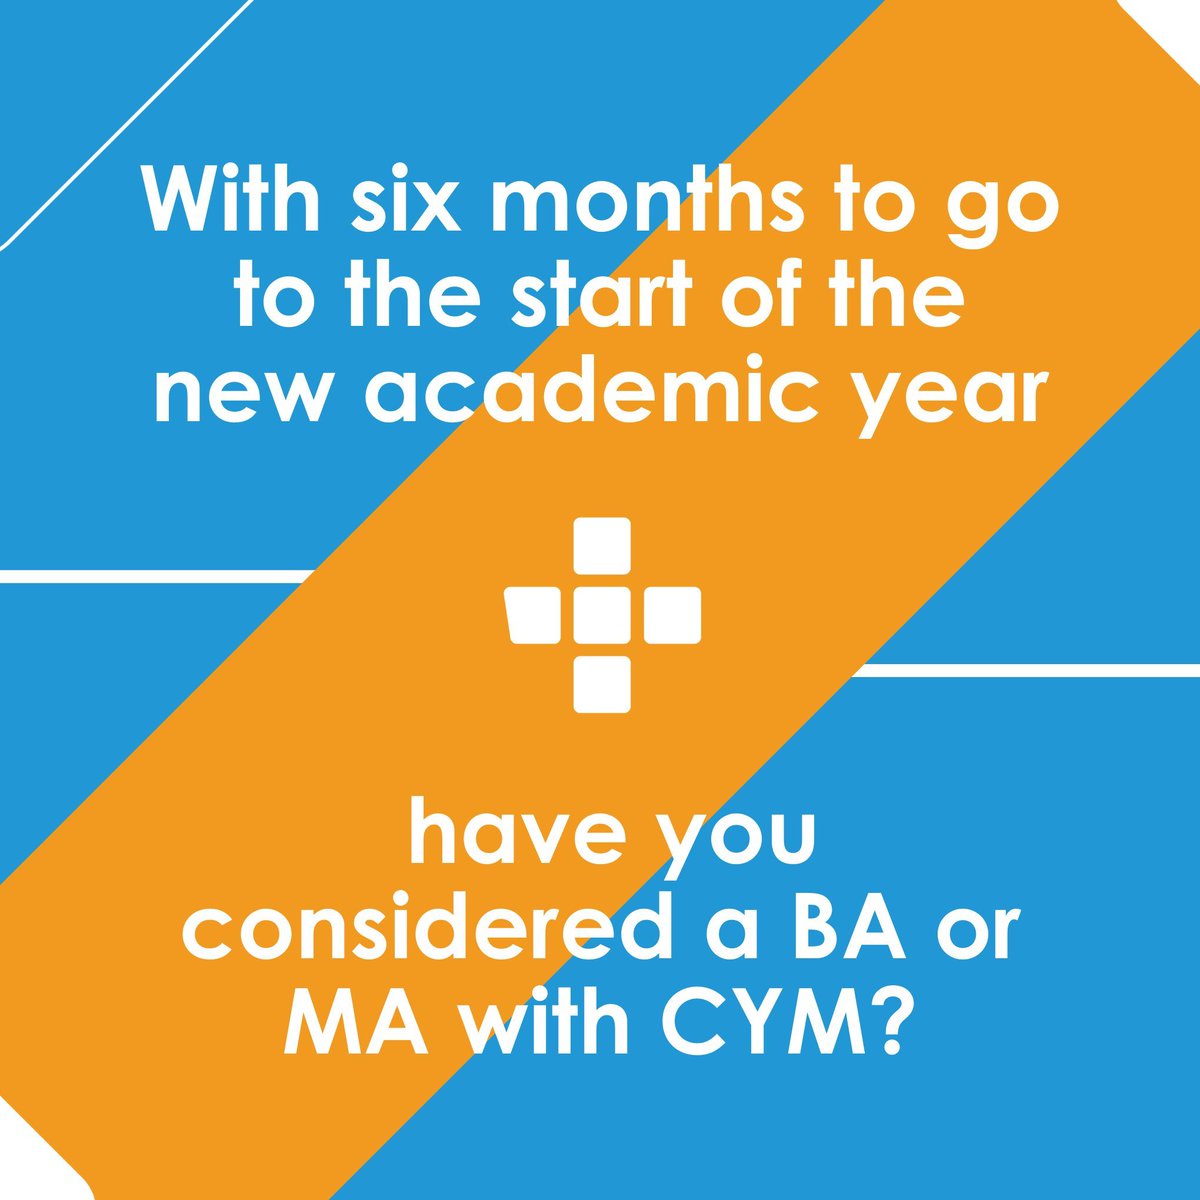 With six months to go to the start of the new academic year have you considered a BA or MA with CYM? BA (hons) in PRACTICAL THEOLOGY MA in MISSION & MINISTRY YOUR JOURNEY STARTS HERE More info can be found in the links in our bio